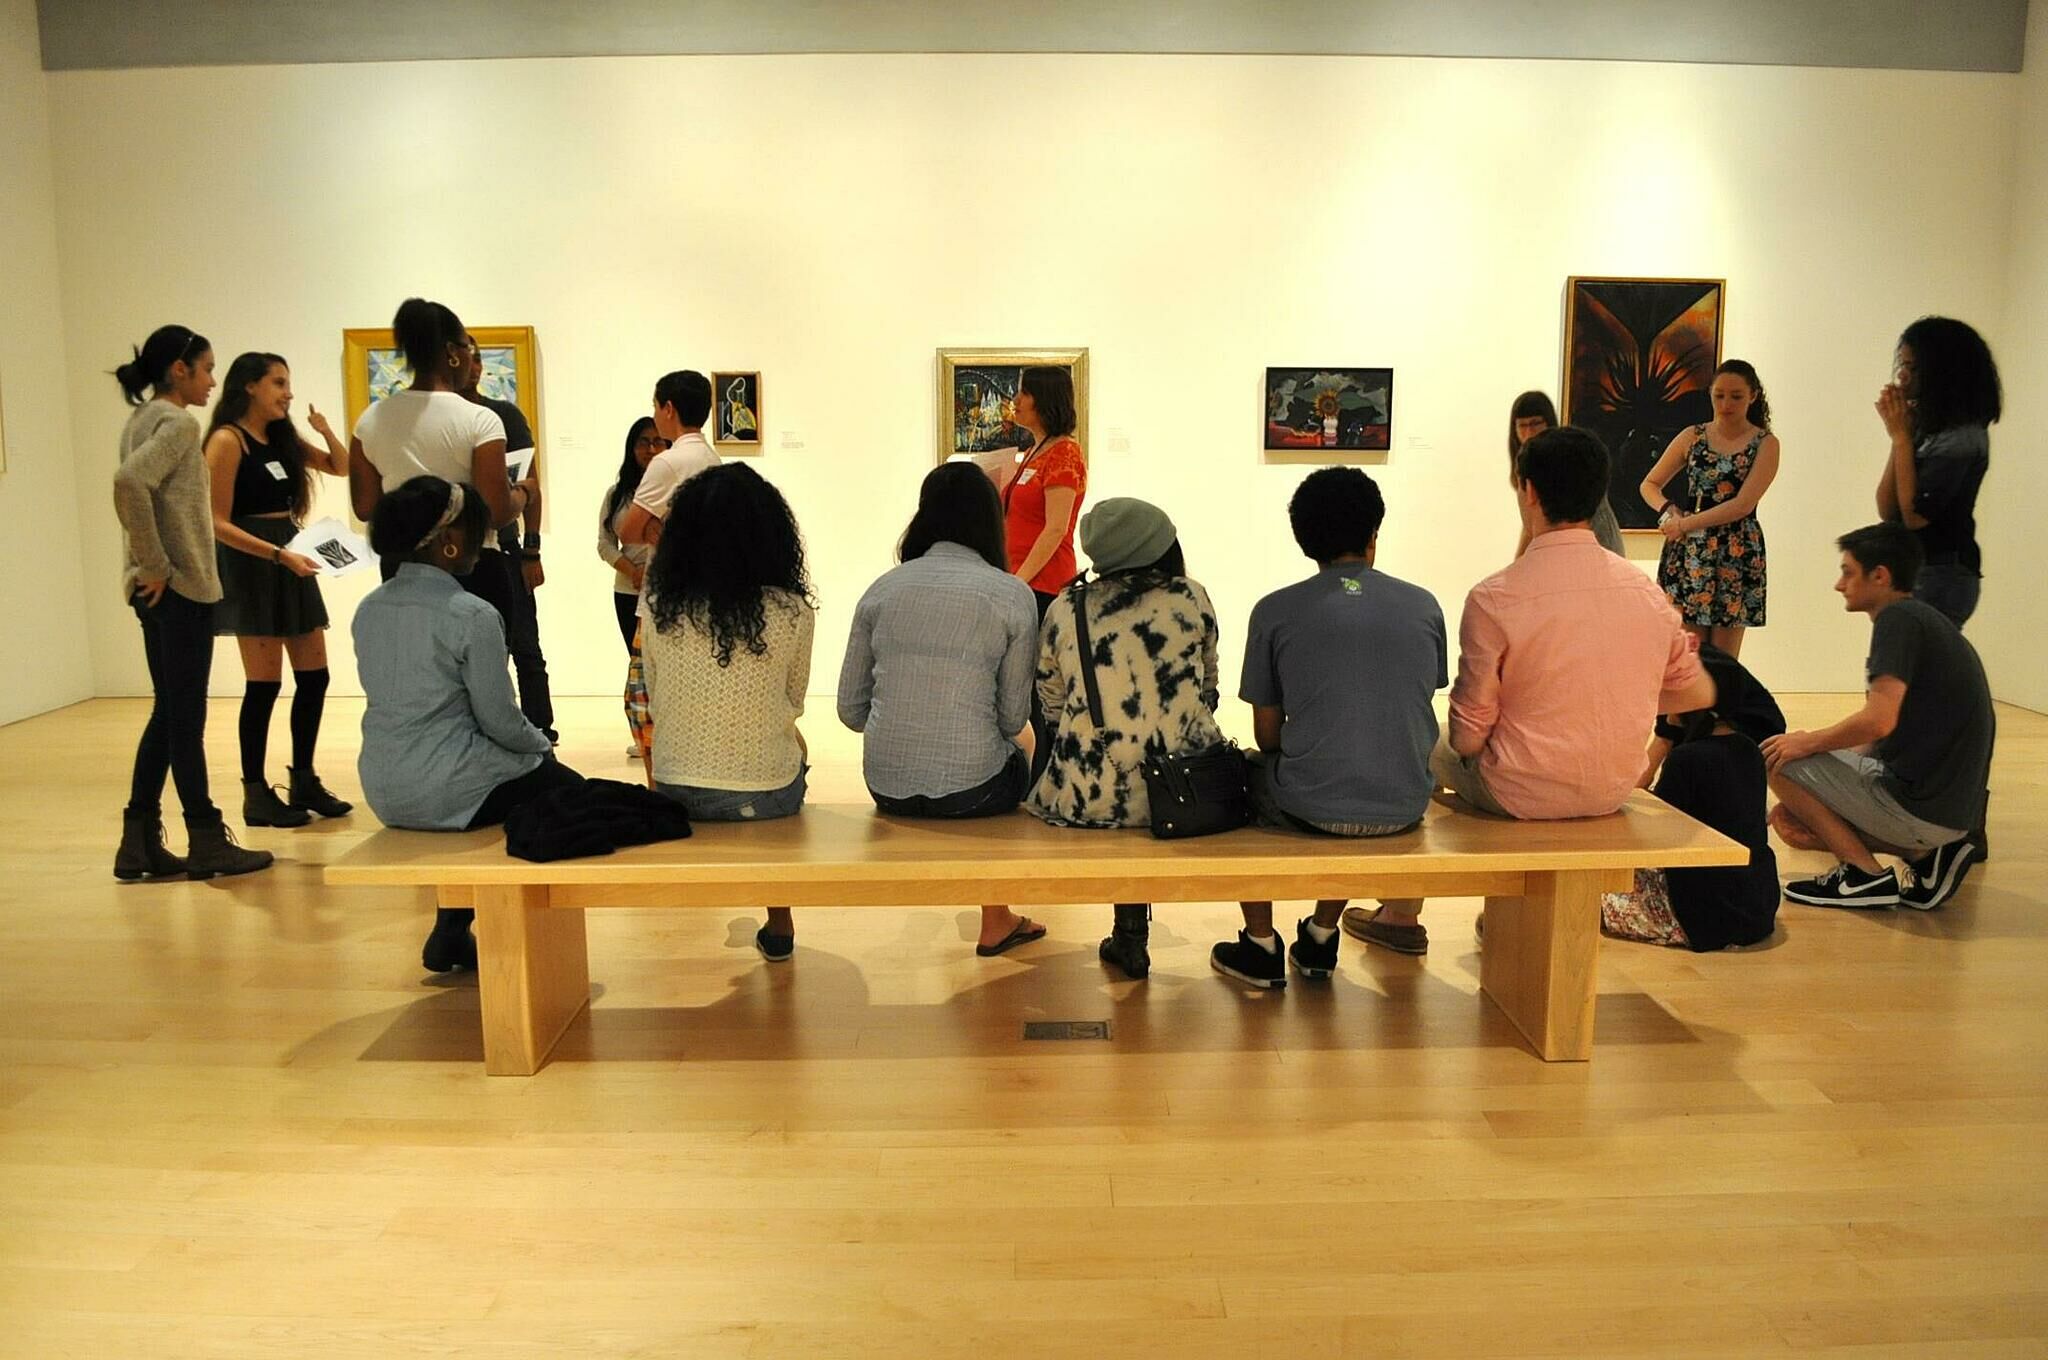 kids sit on bench in gallery room